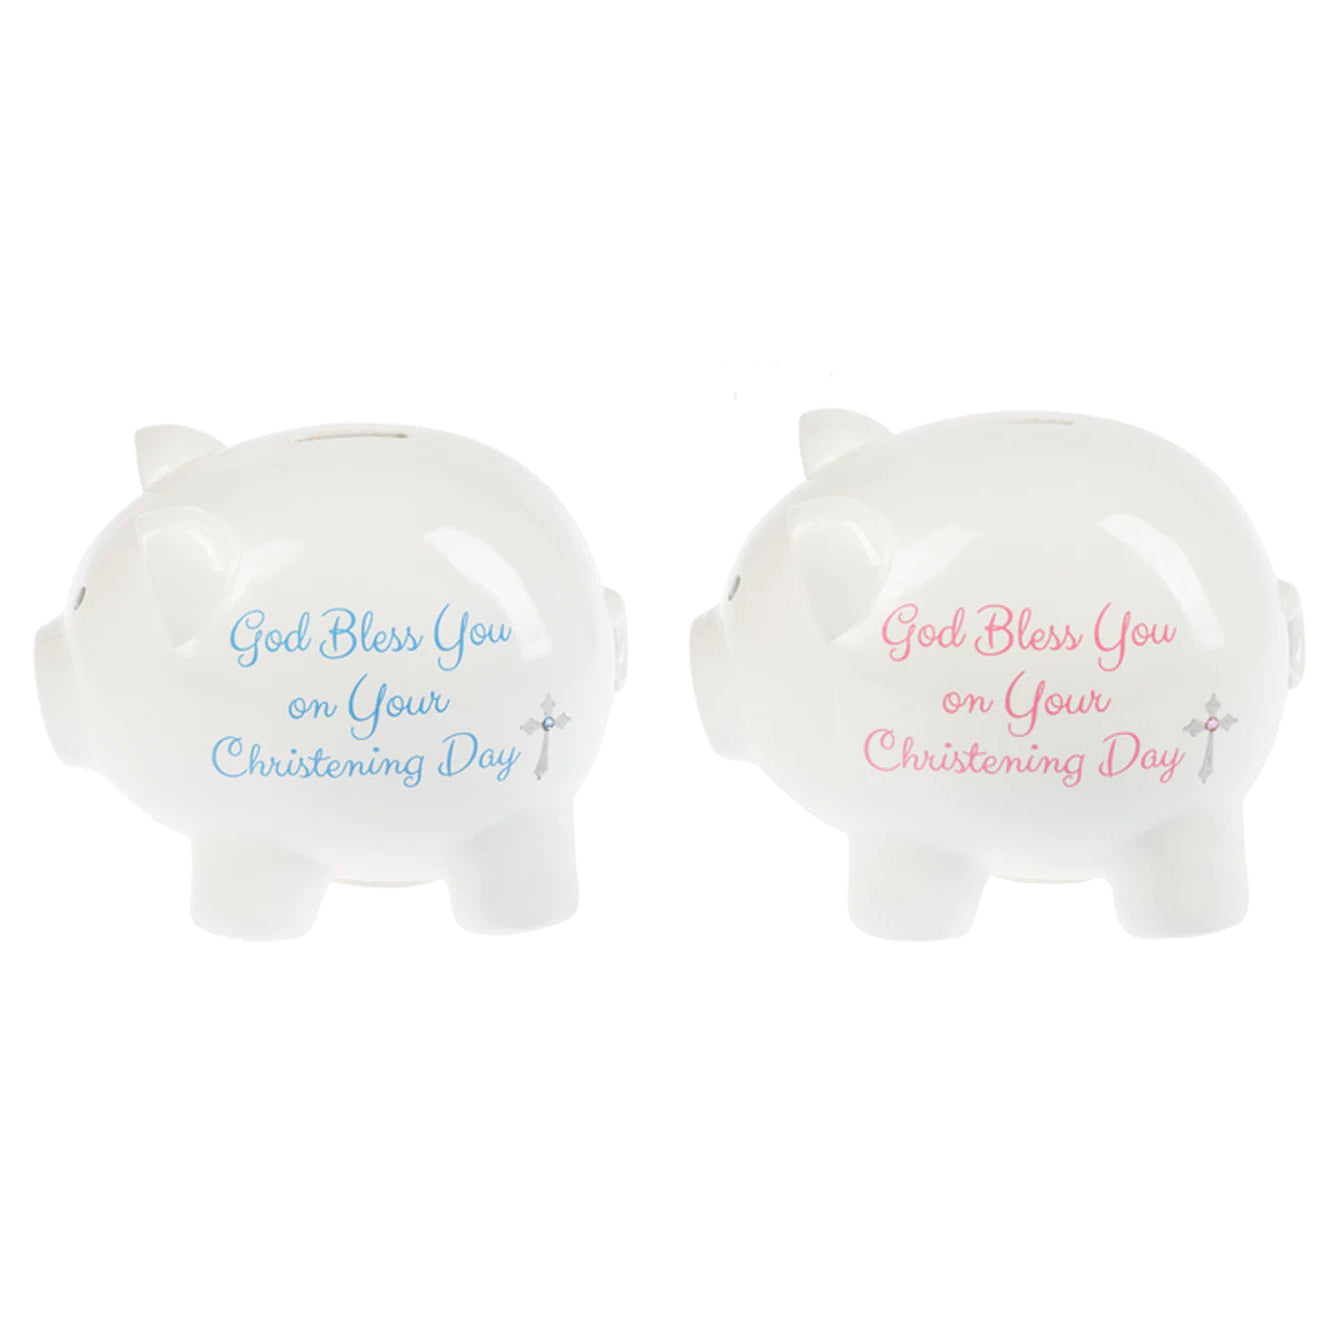 Christening Coin Bank